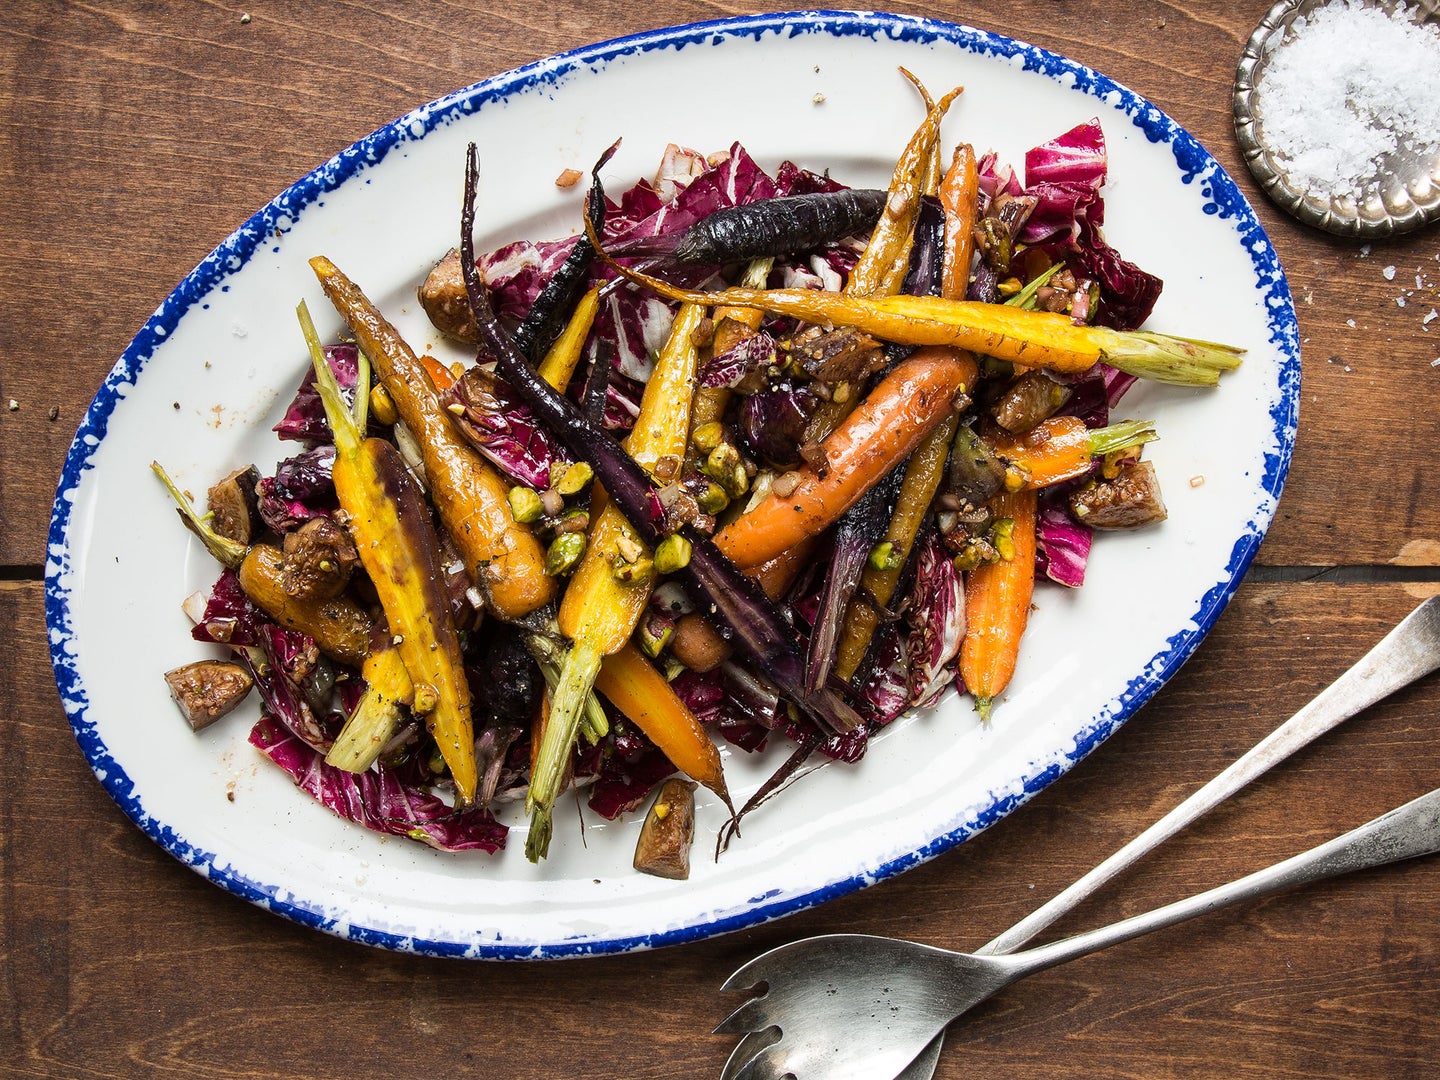 Carrot and Pistachio Salad